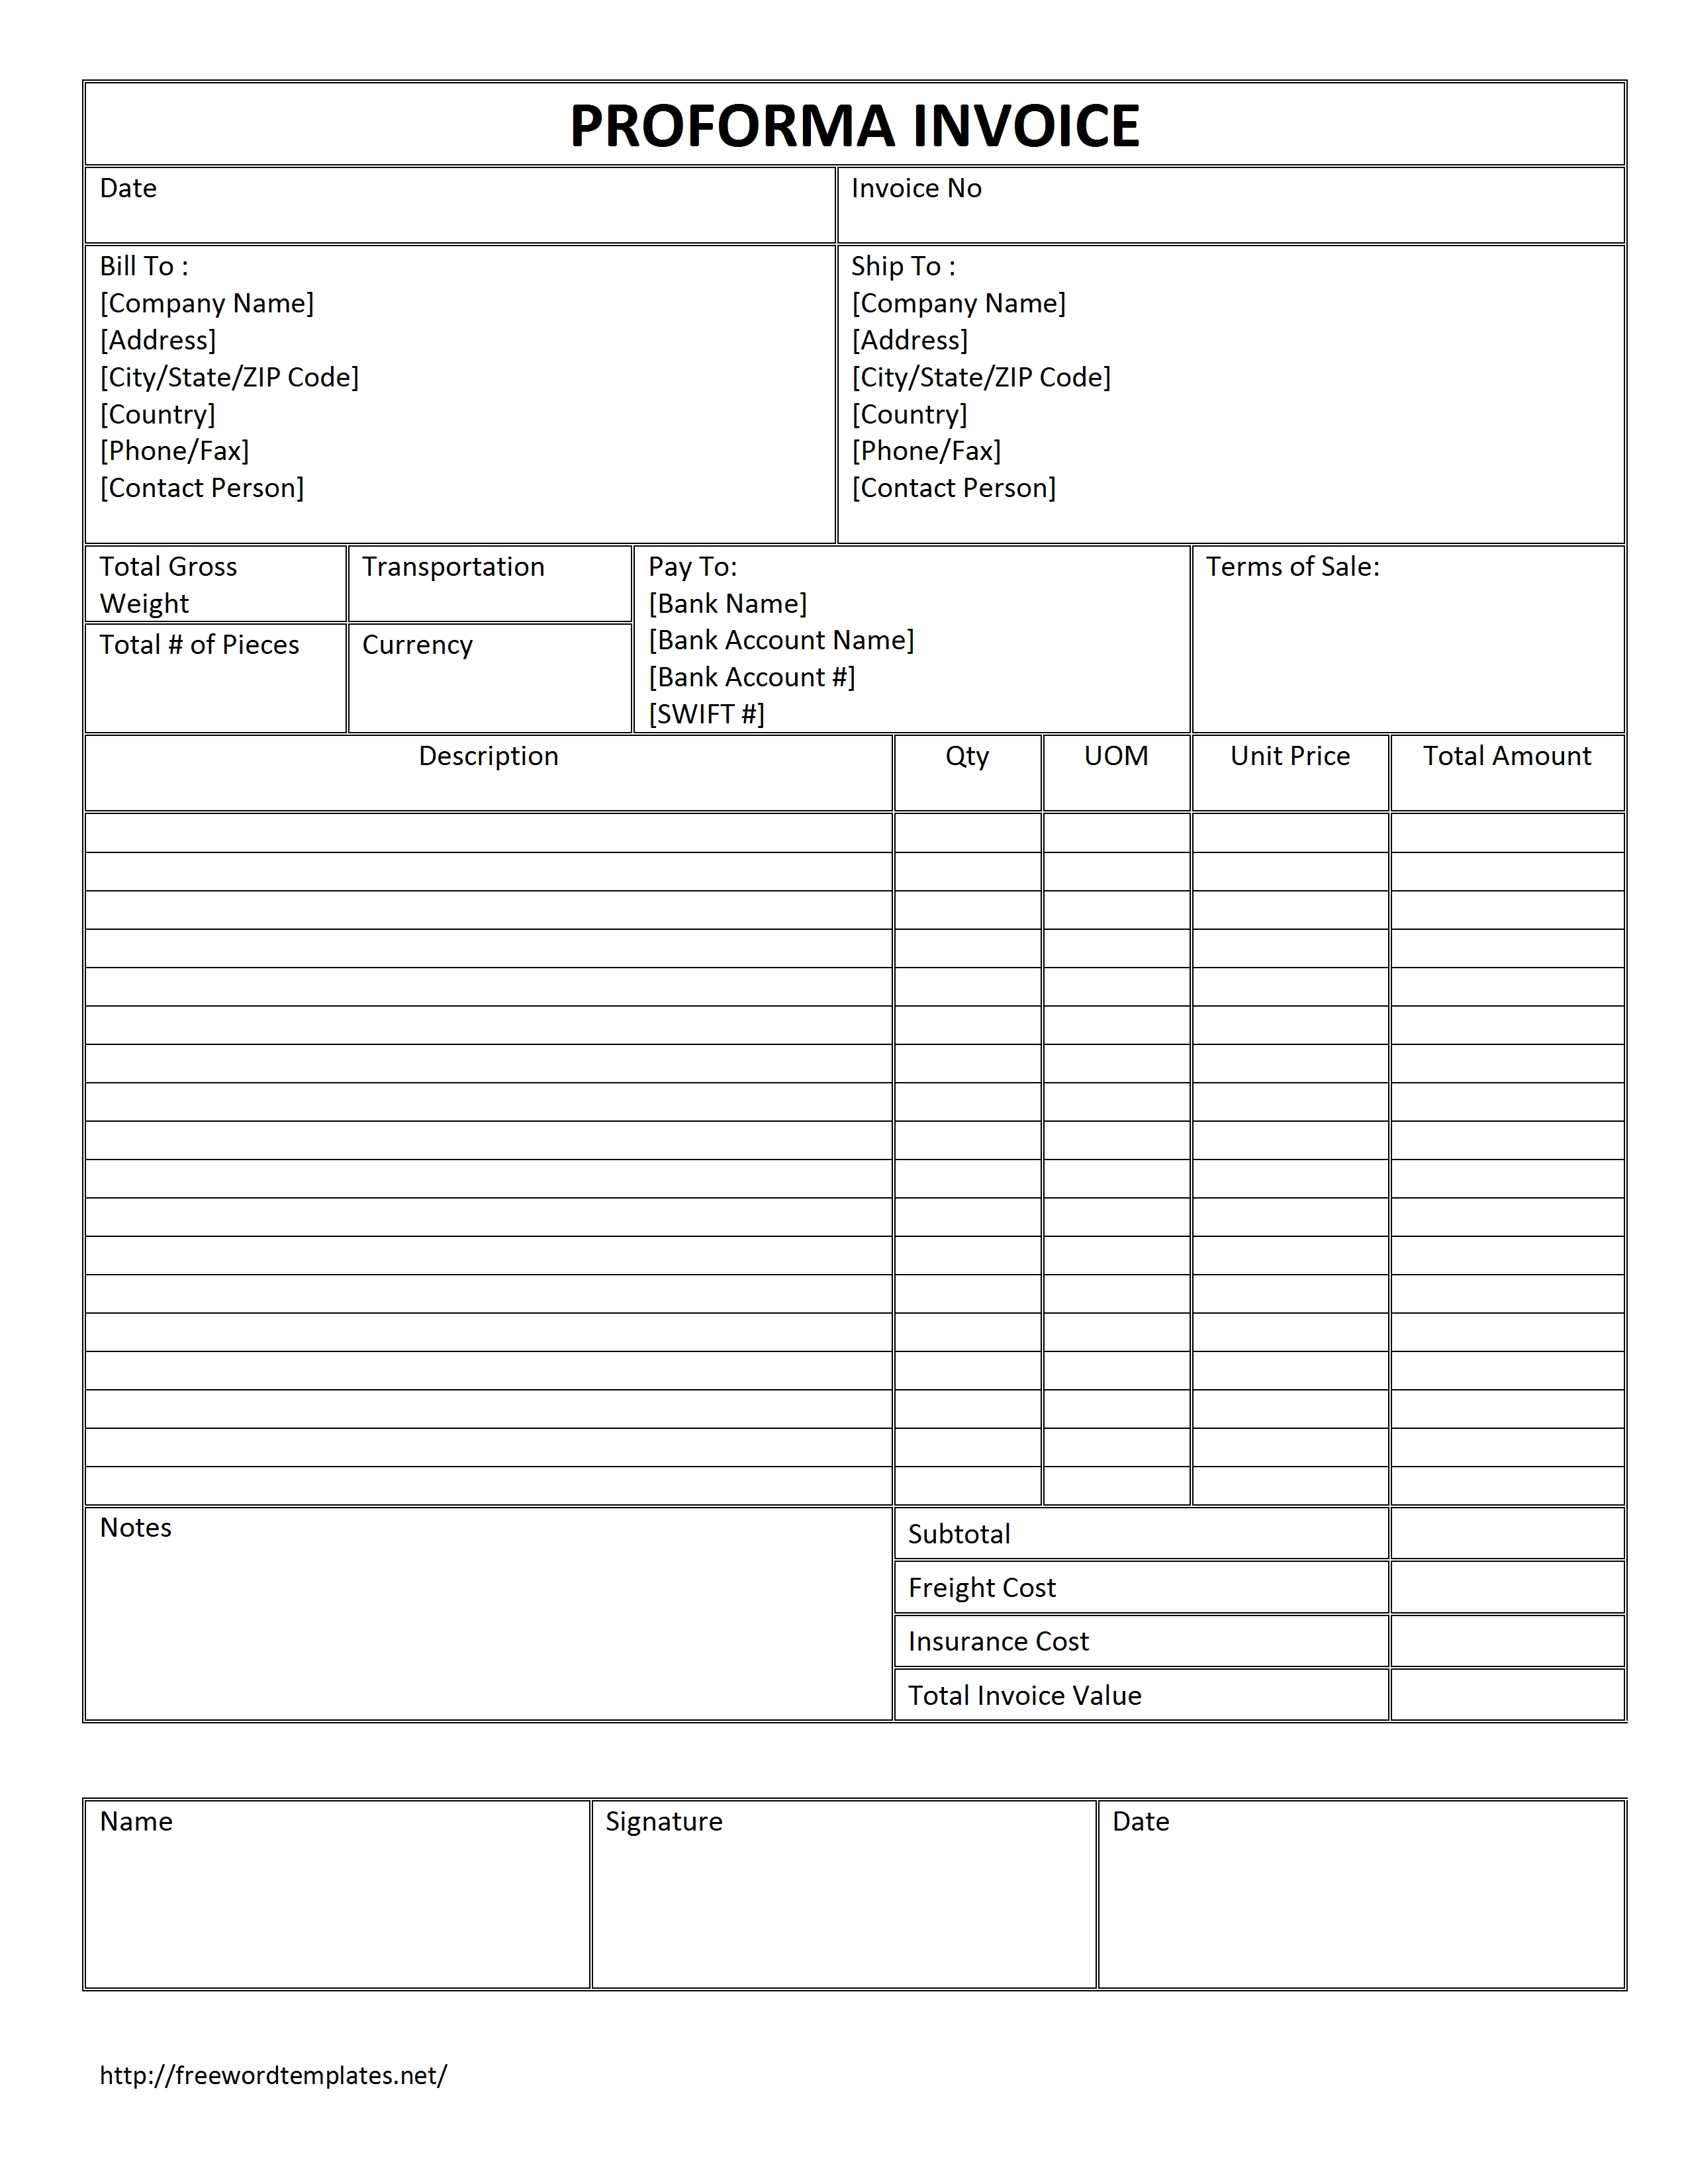 word templates free and printable microsoft word templates part 23 making an invoice in word